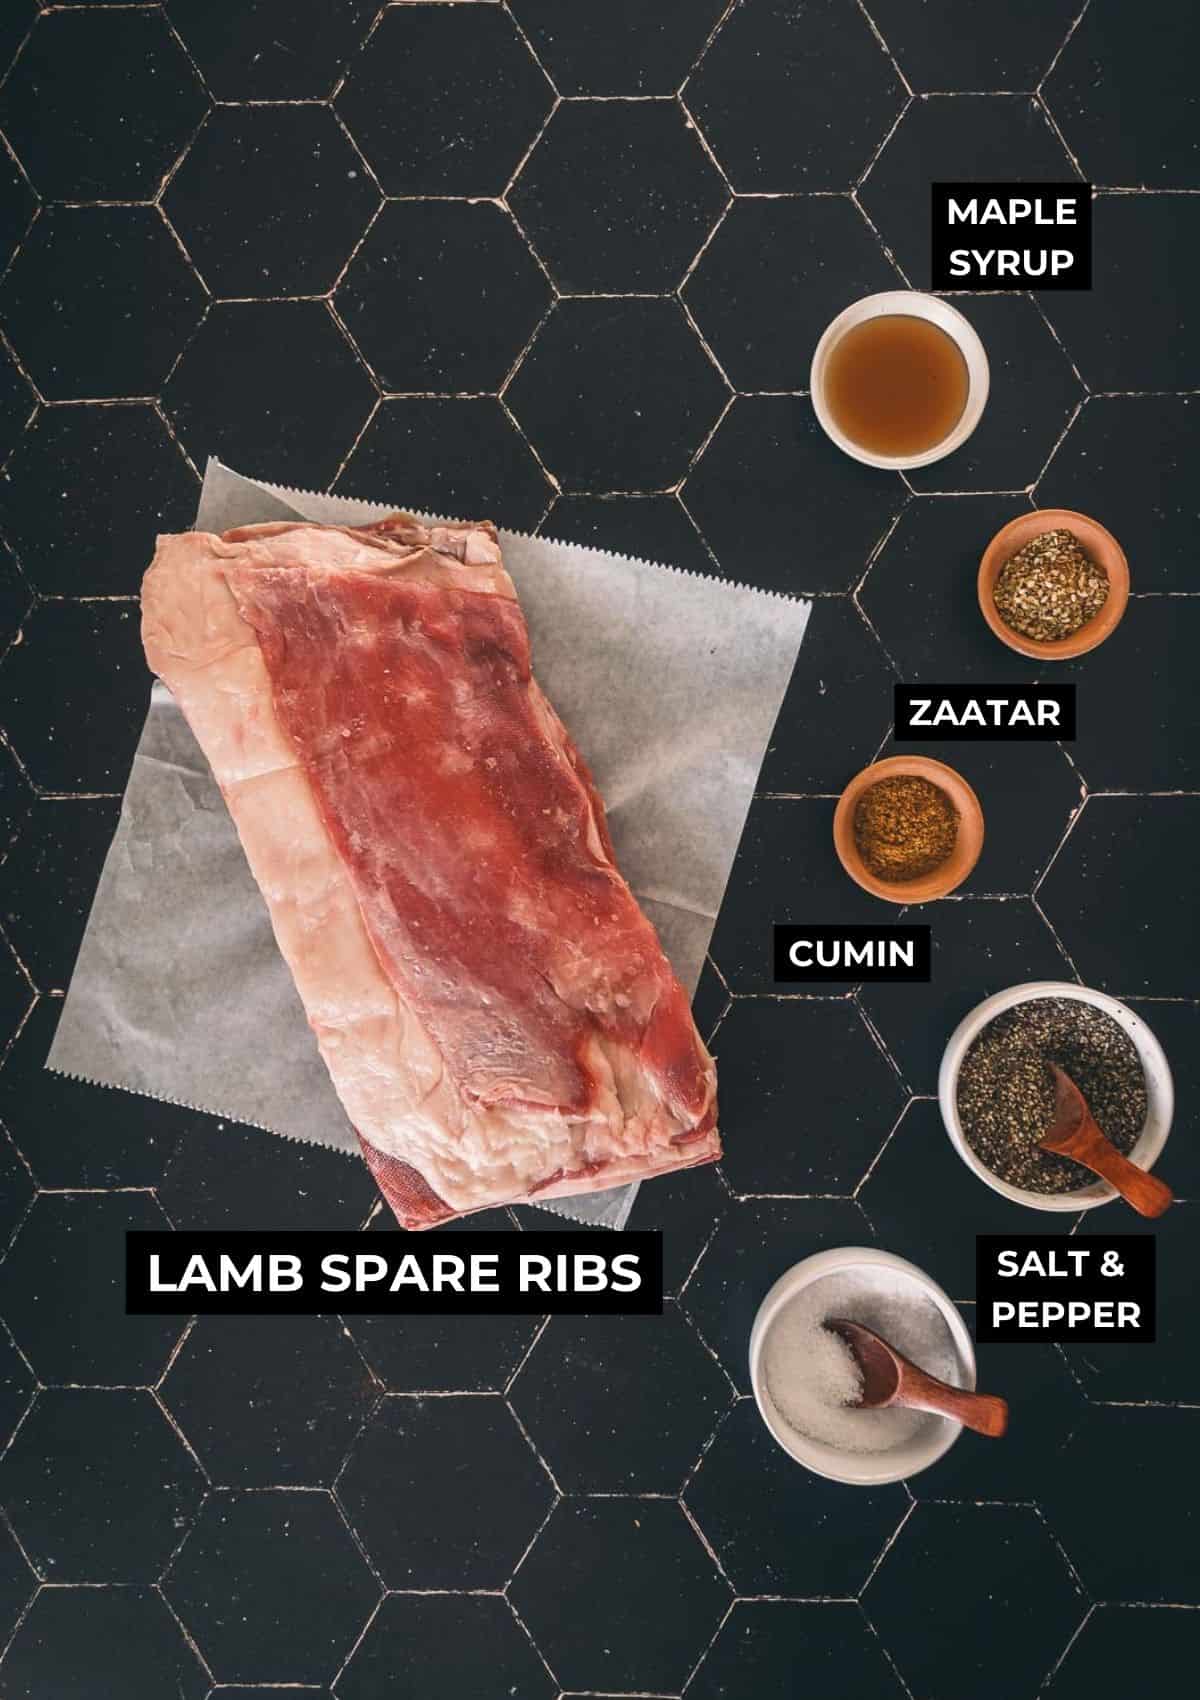 Ingredients for this grilled lamb recipe.